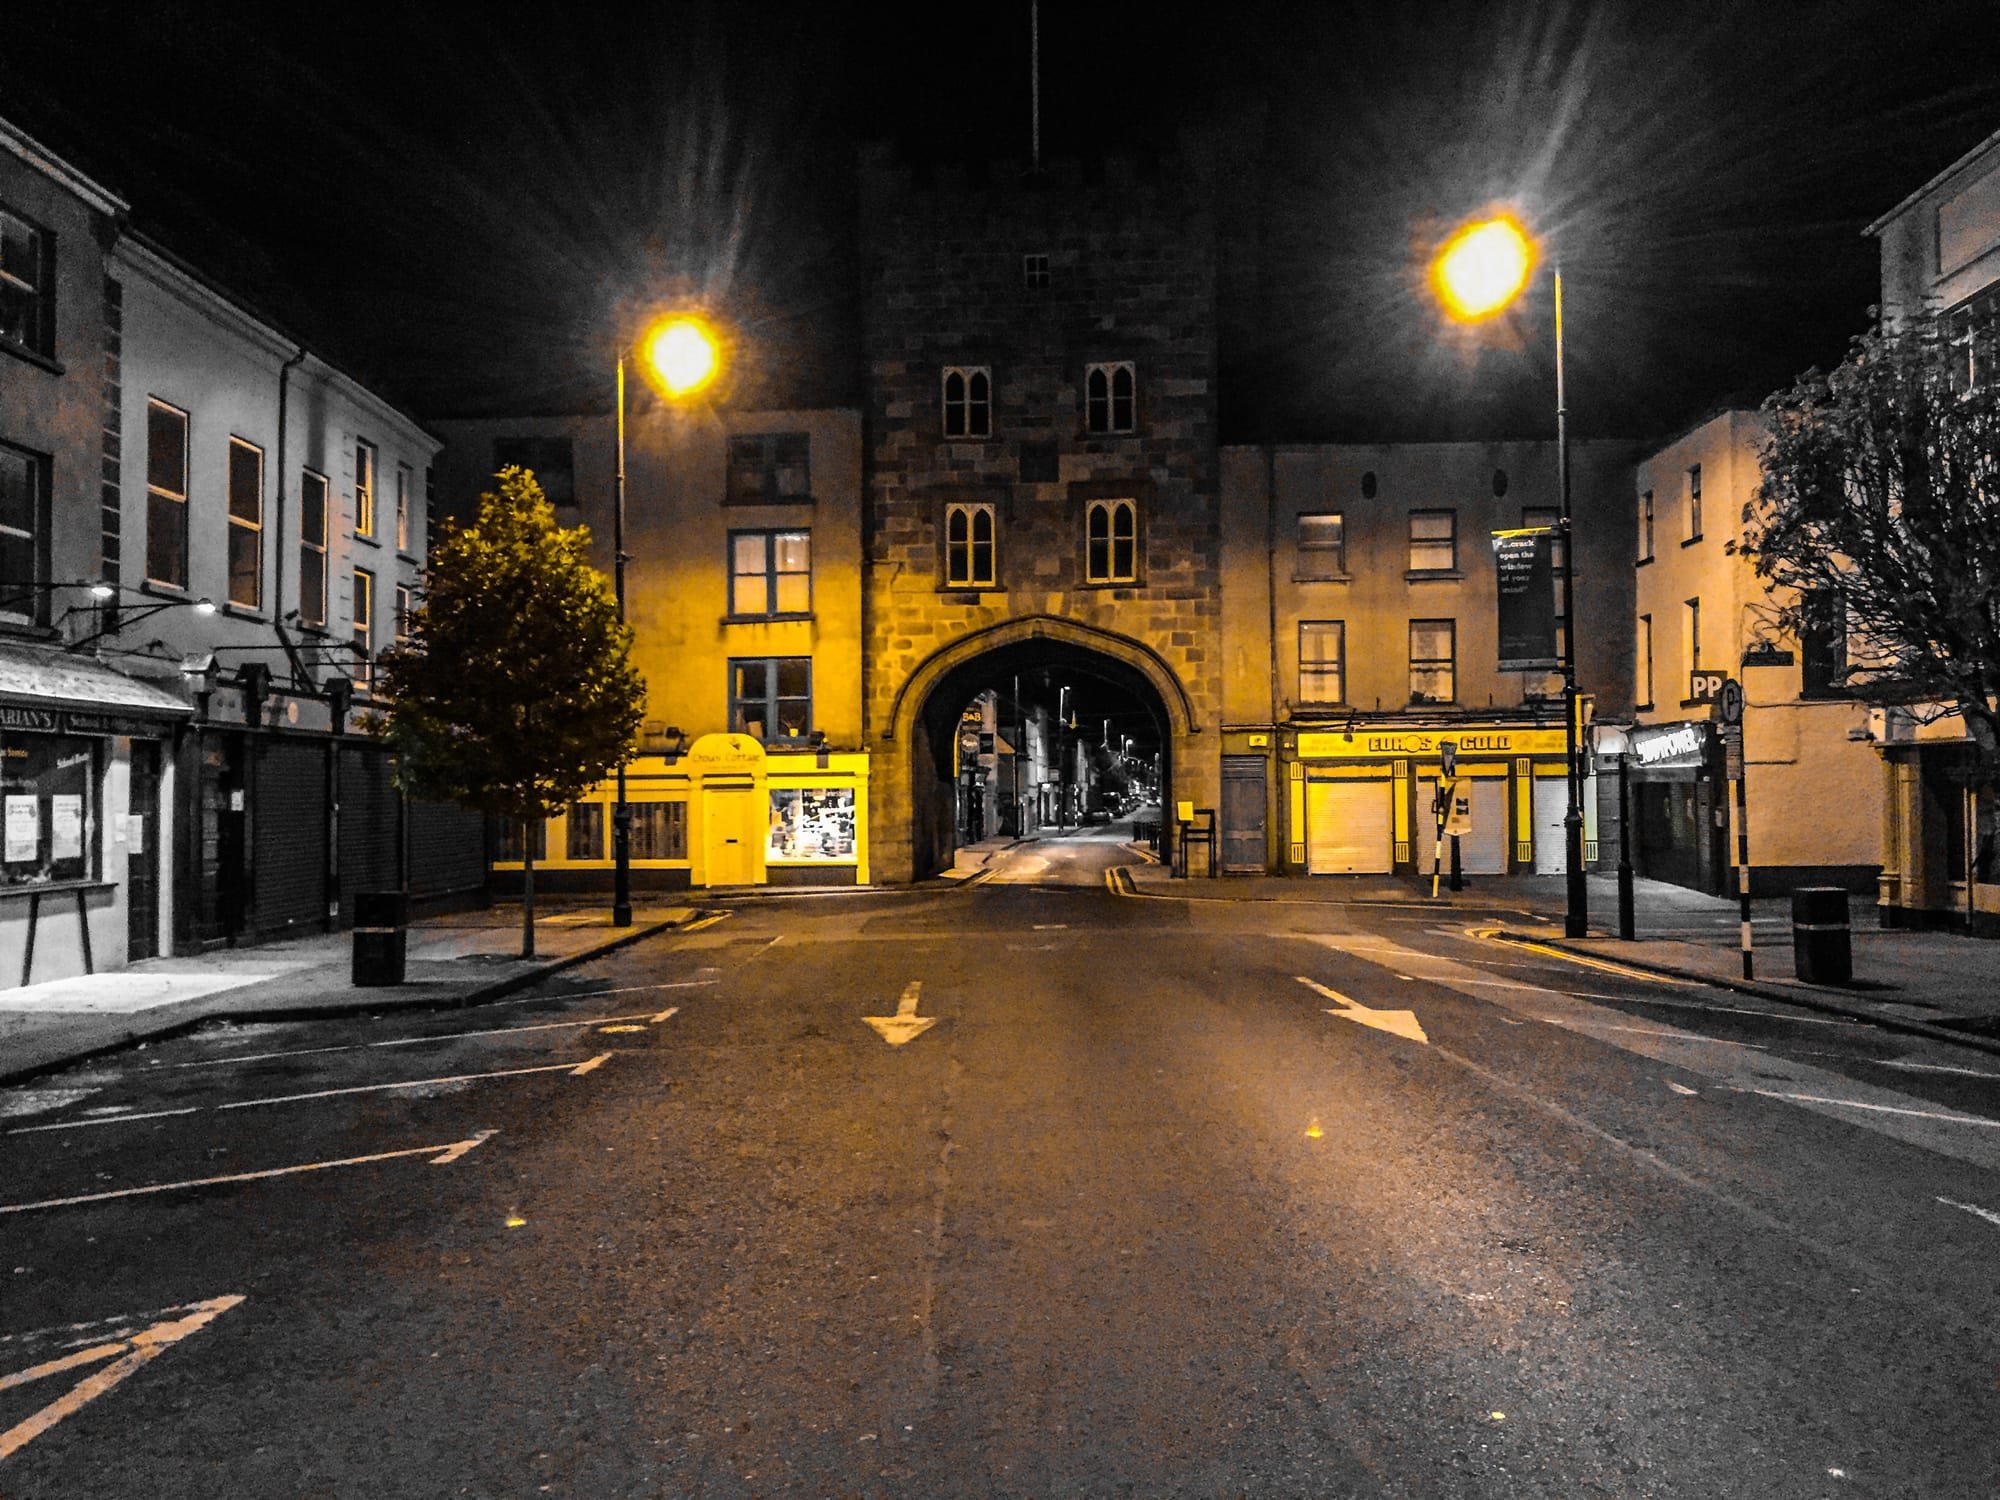 O'Connell St looking towards the West Gate in Clonmel